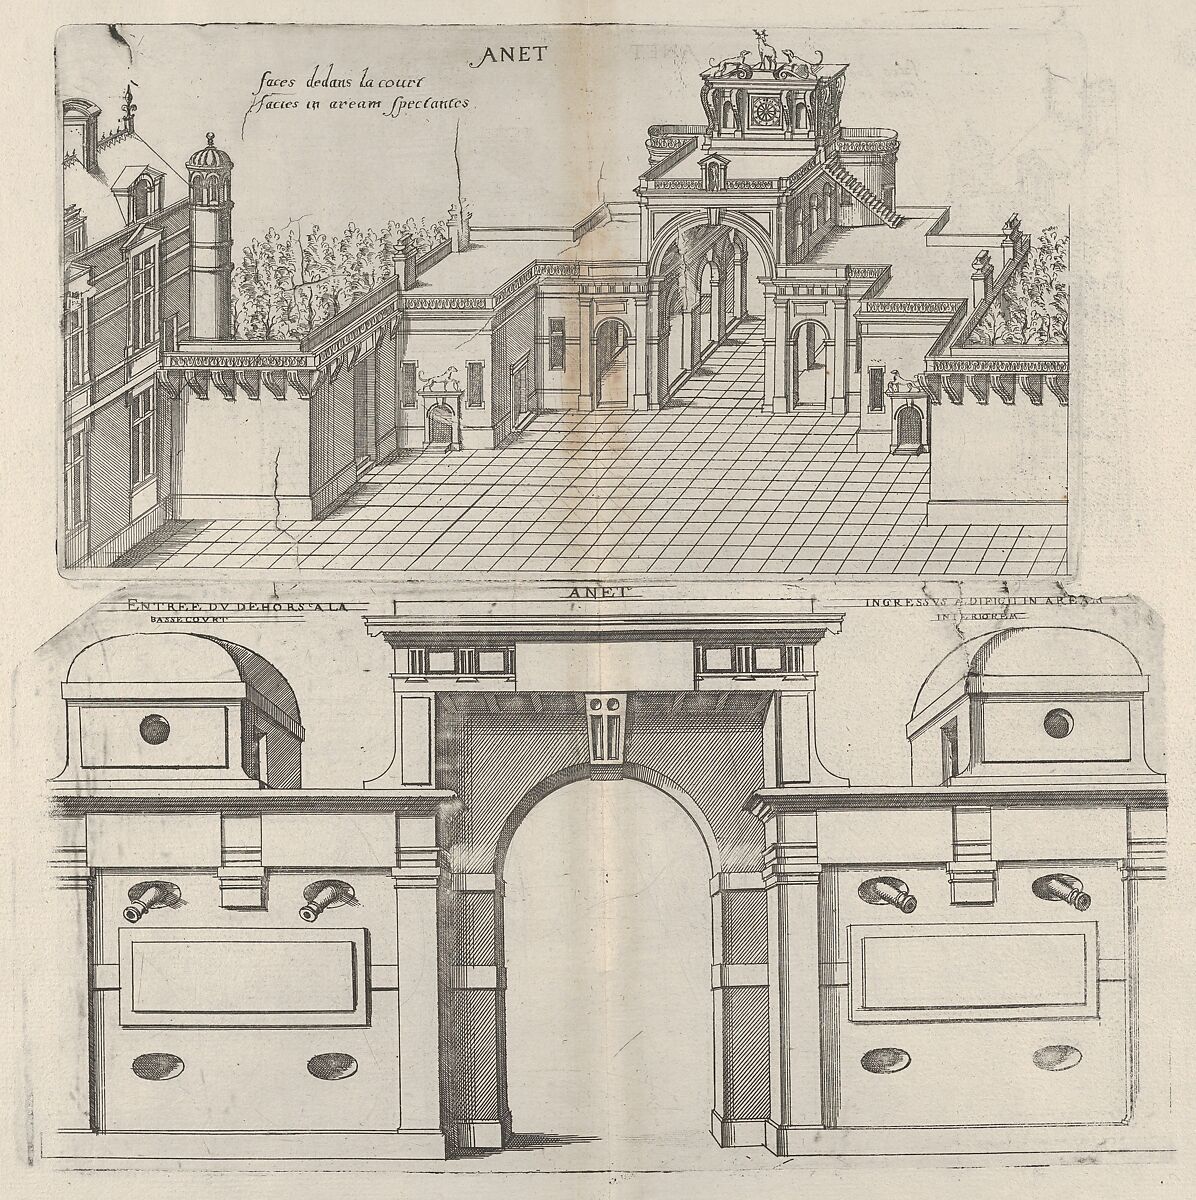 Interior View of the Court Yard and Frontal View of the Defense Mechanism at Chateau d'Anet, from "Les plus excellents bastiments de France", Jacques Androuet Du Cerceau (French, Paris 1510/12–1585 Annecy), Engraving 